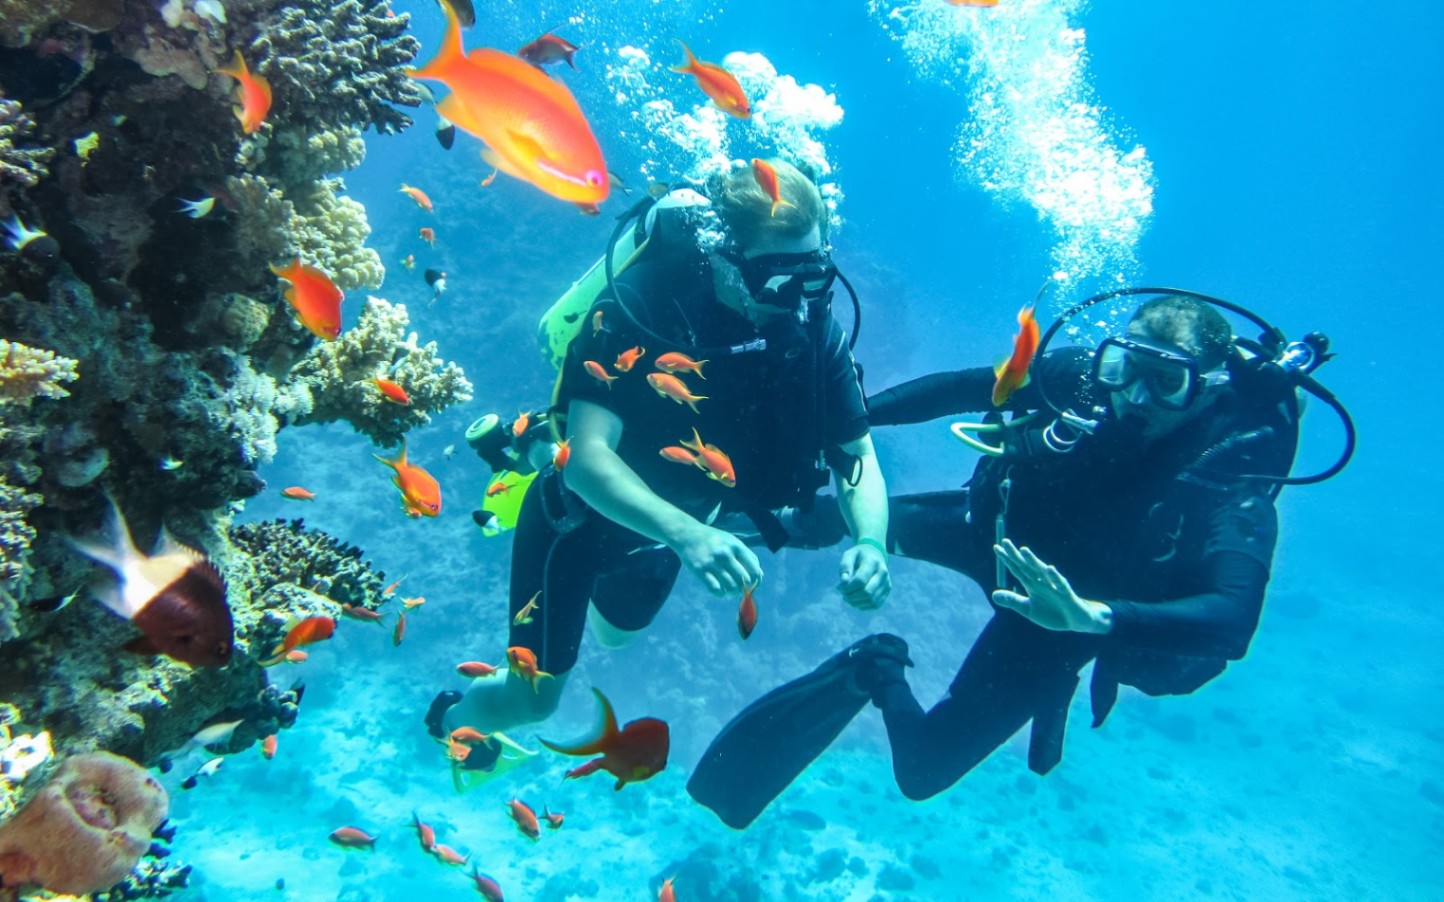 The Best Places to Scuba Dive Around the World